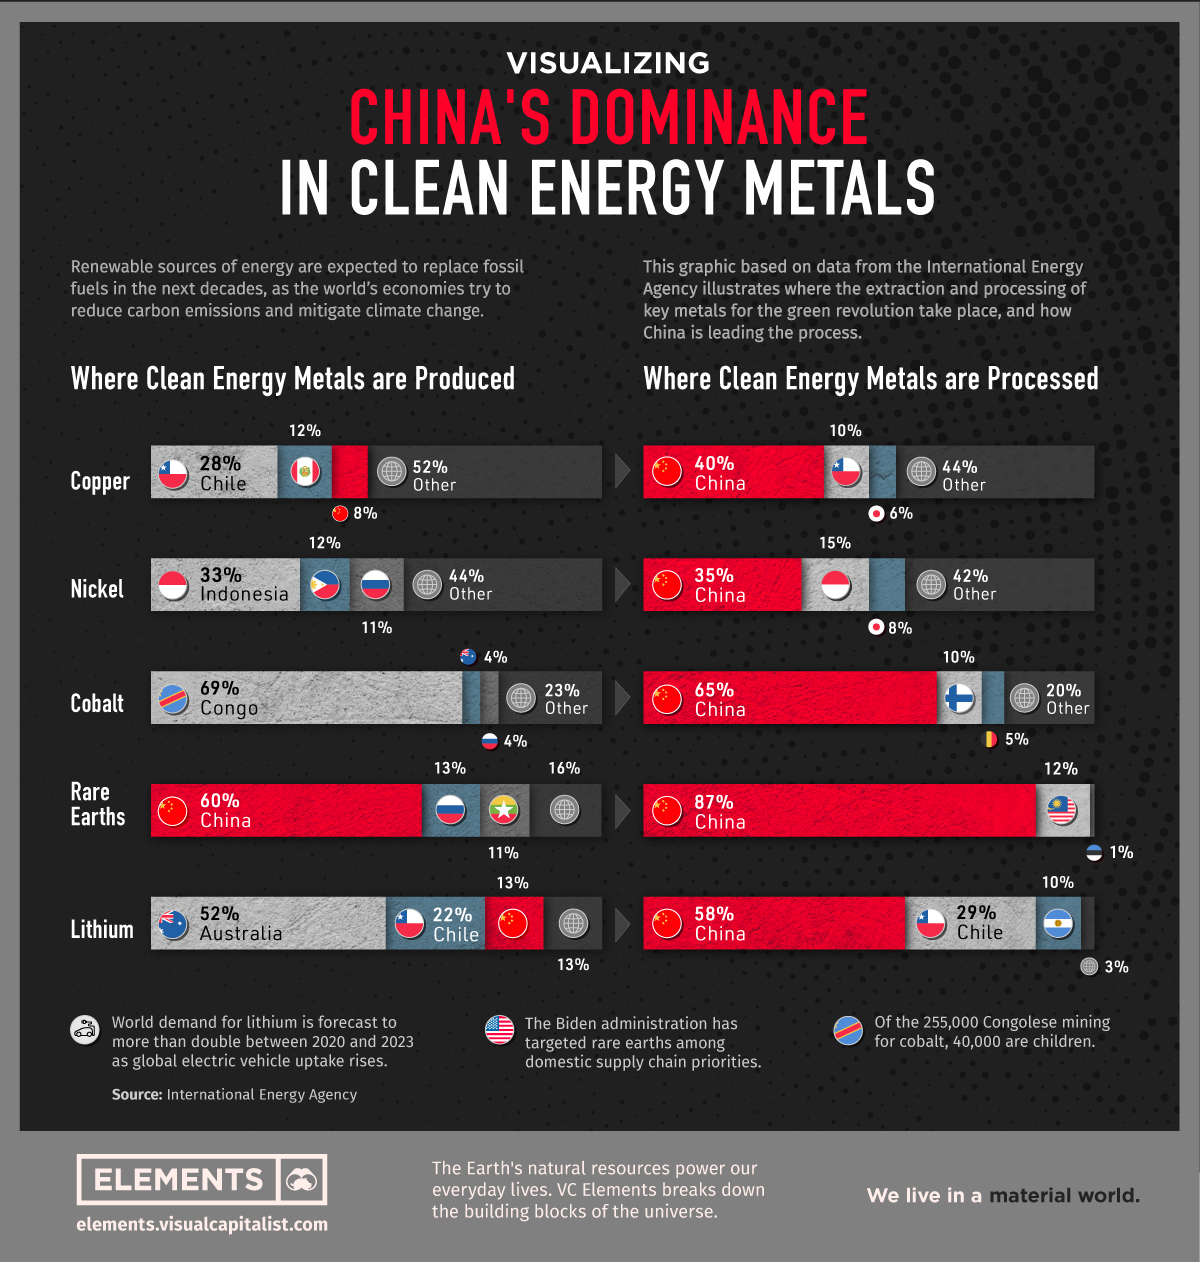 Visualizing China’s Dominance in Clean Energy Metals